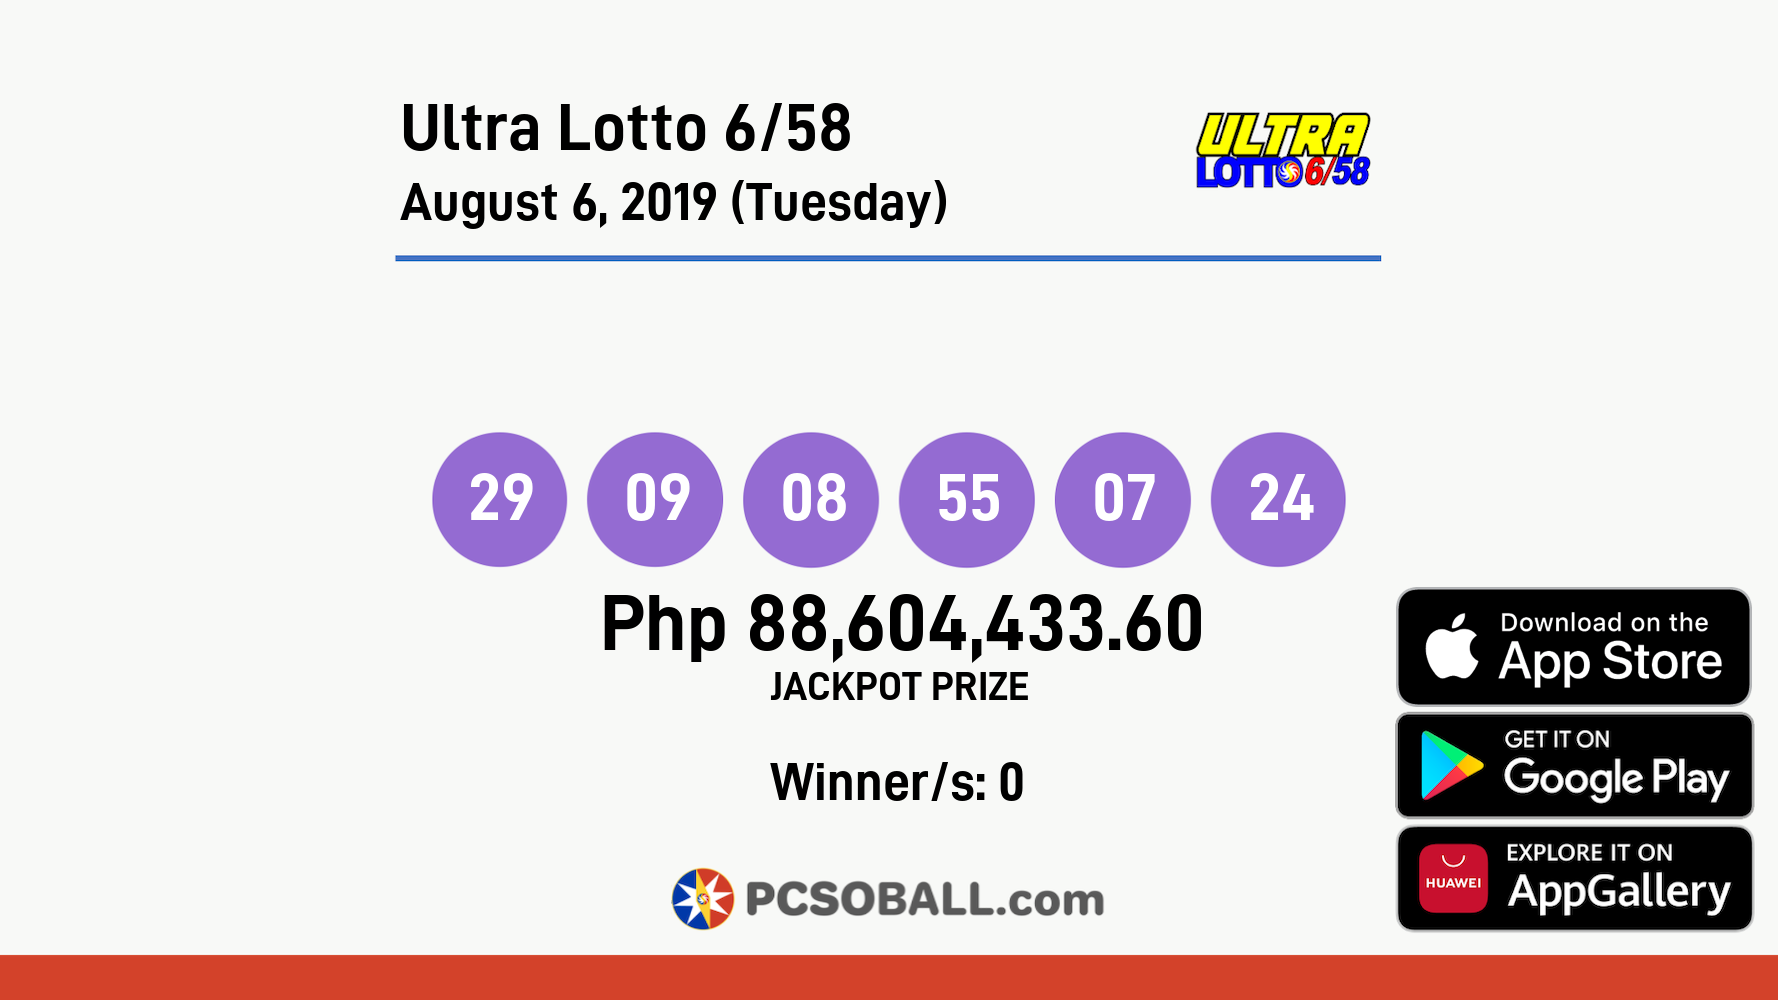 Ultra Lotto 6/58 August 6, 2019 (Tuesday) Result